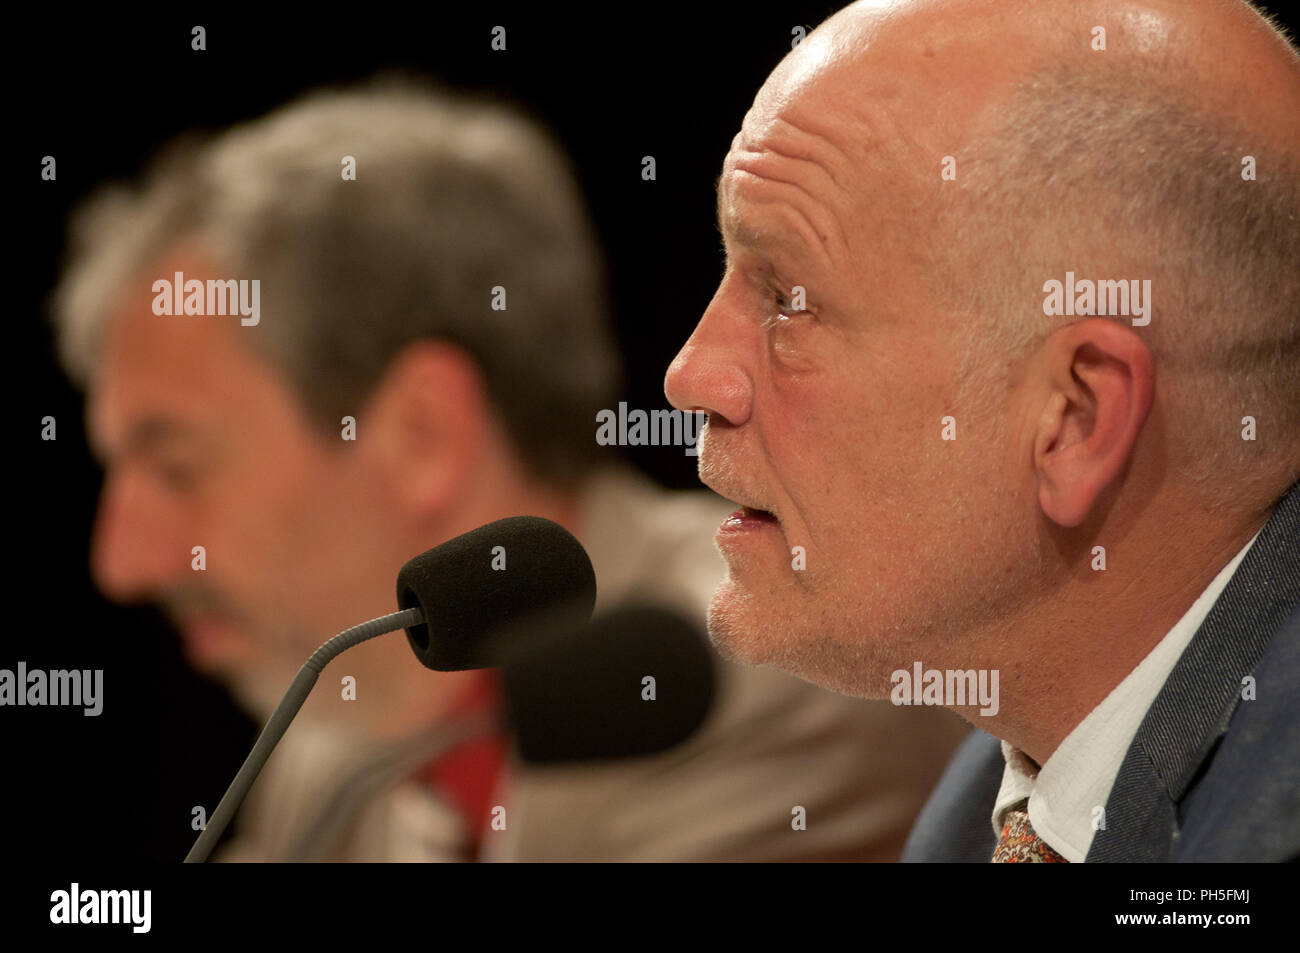 Actor John Malkovich seen in a discussion at Filmfest München 2011 Stock Photo